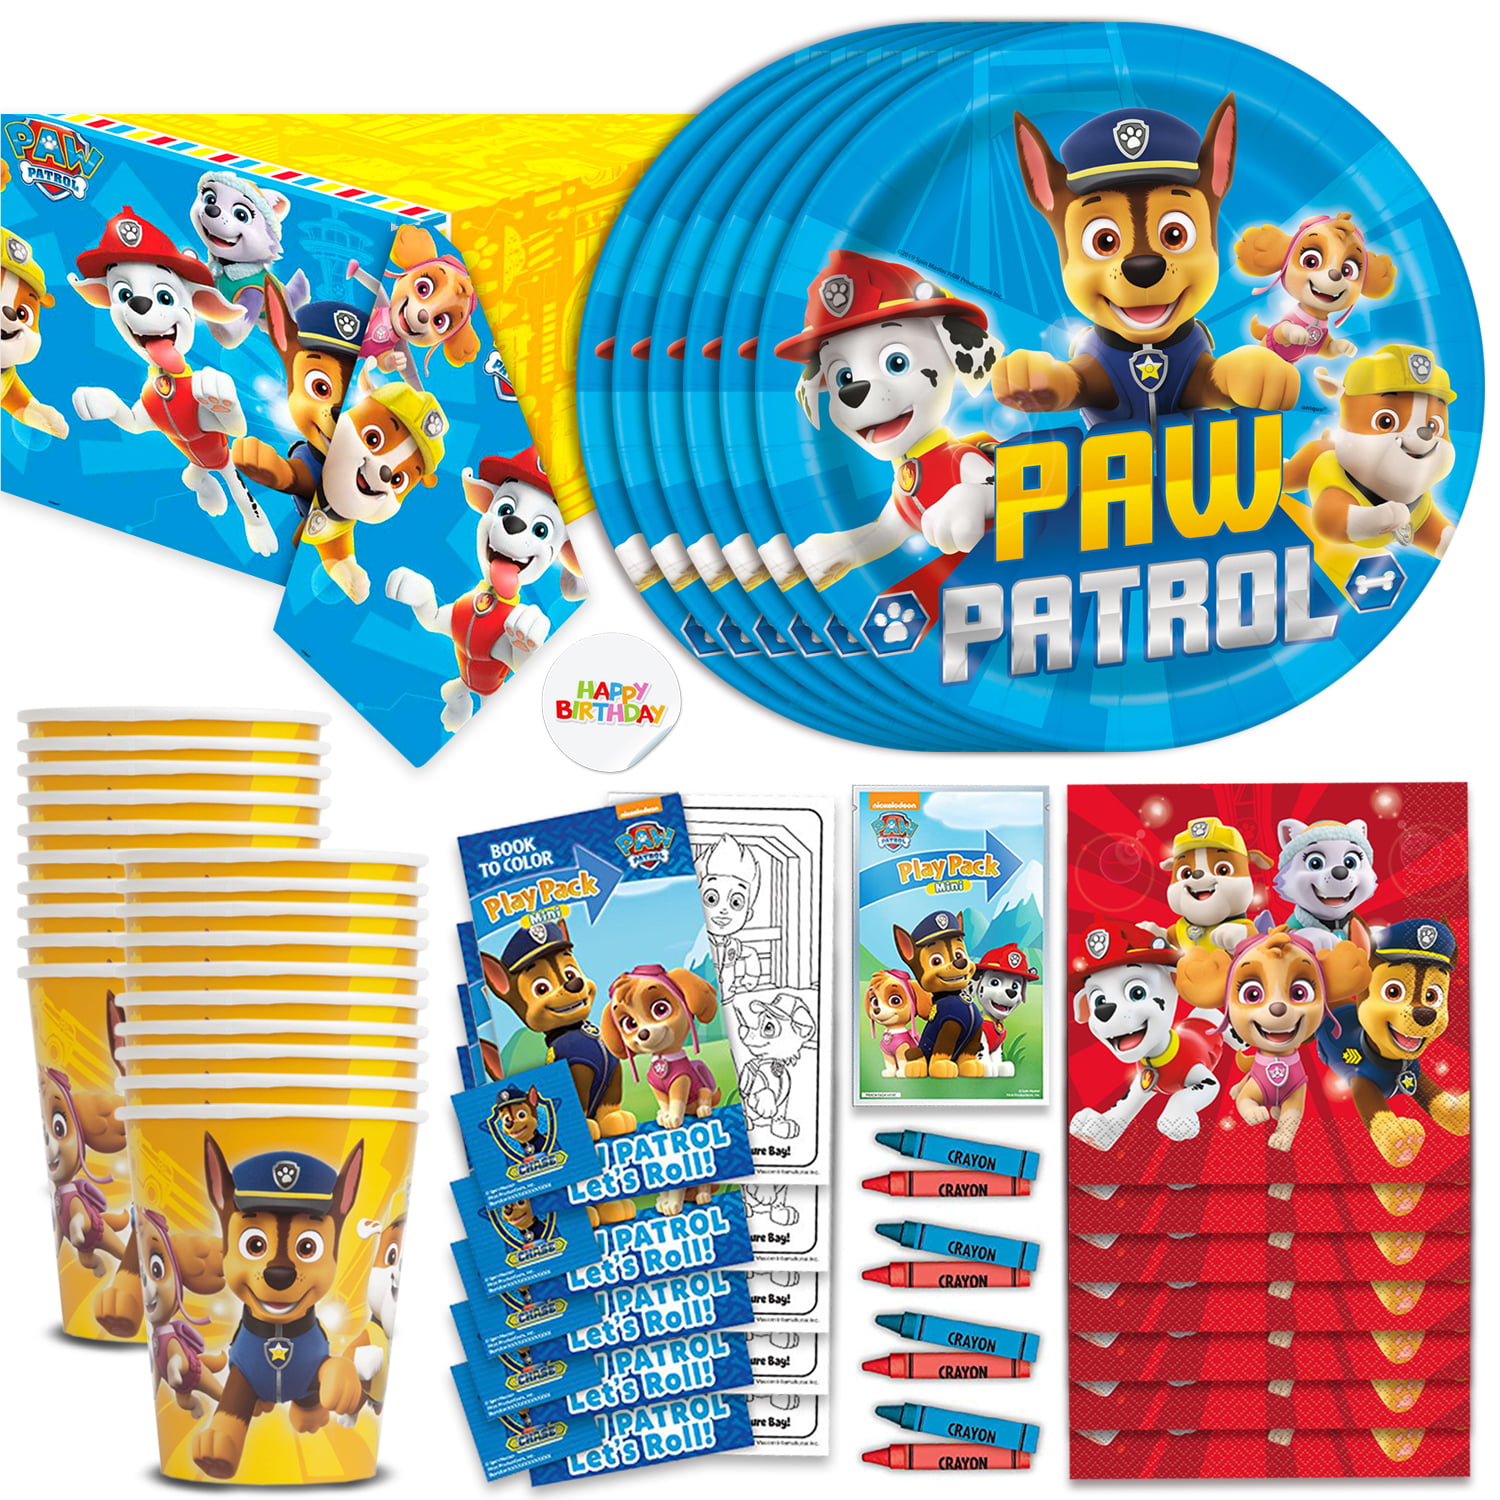 Paw Patrol Sticker Fun Activity T.V character B-day Item Gift Party Fun Activity 